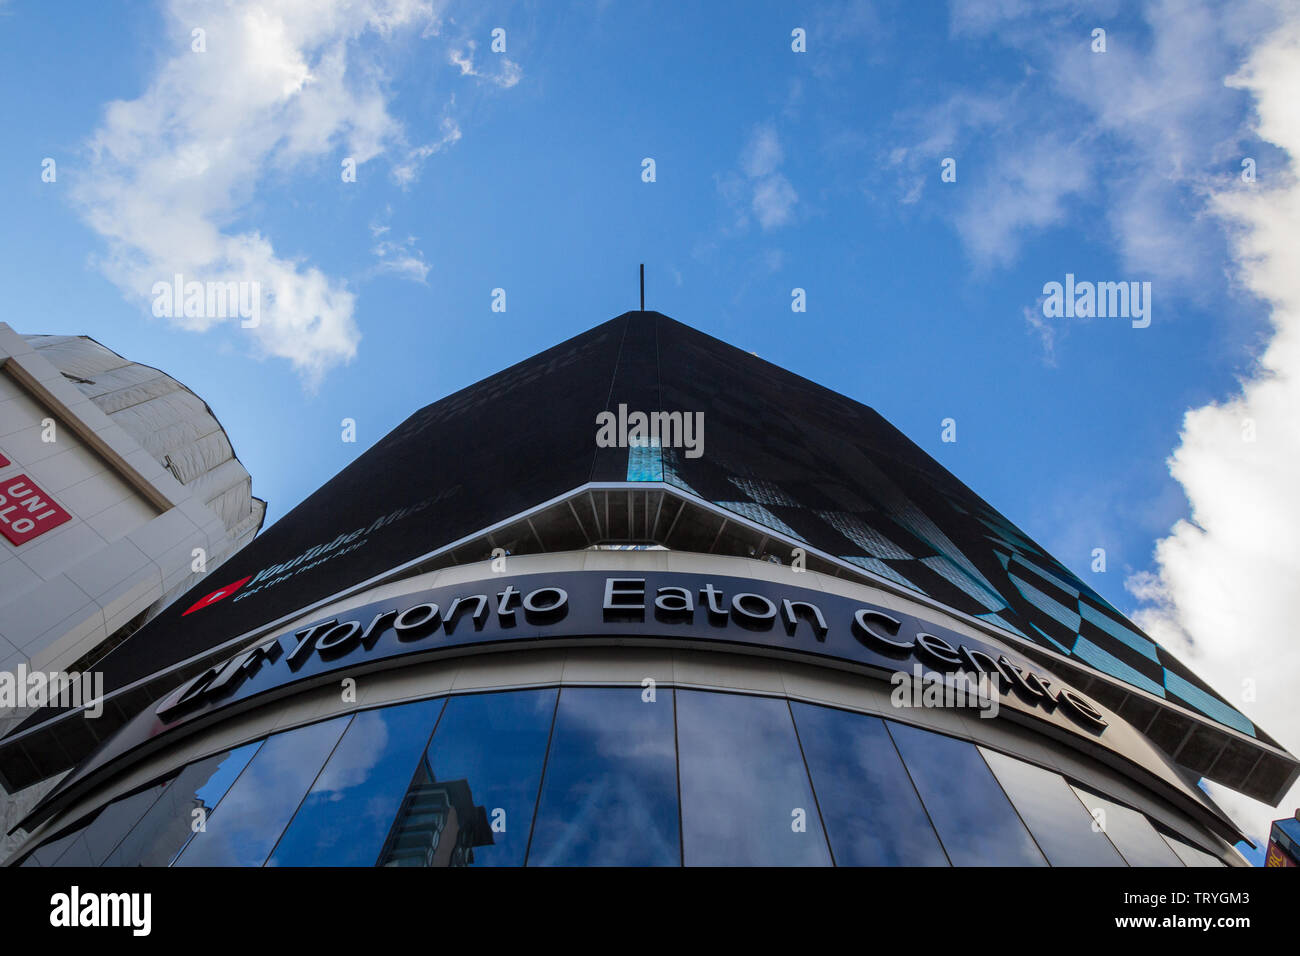 TORONTO, CANADA - NOVEMBER 13, 2018: Cadillac fairview logo on their main office in CF Toronto Eaton Centre, themain shopping mall of the city and a l Stock Photo